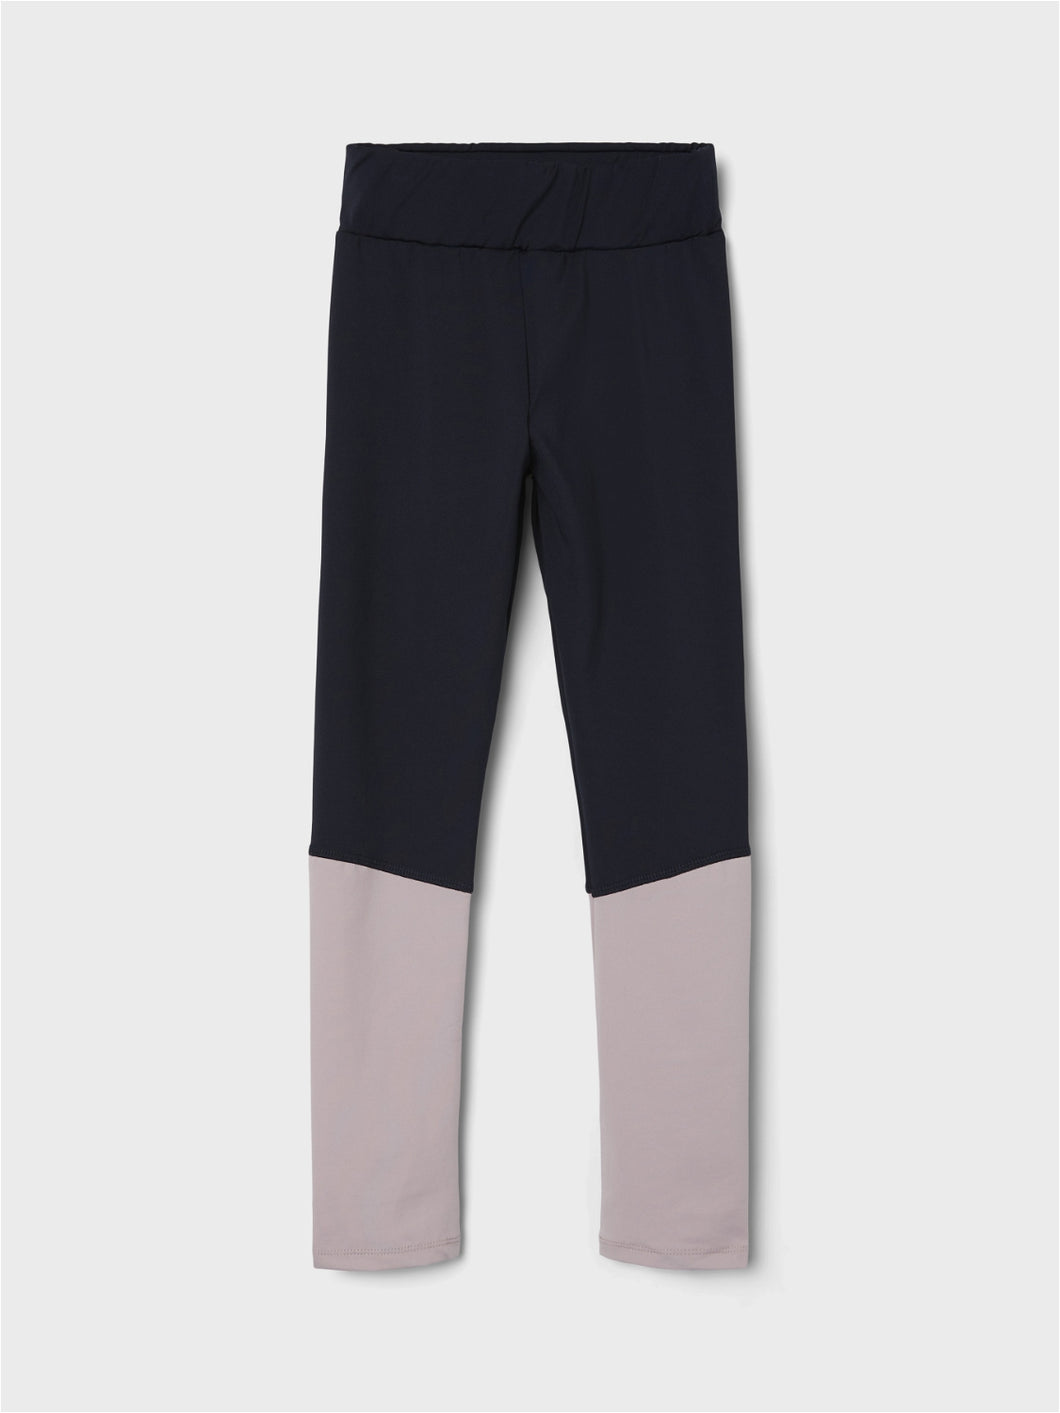 NKFTORY Trousers - Violet Ice